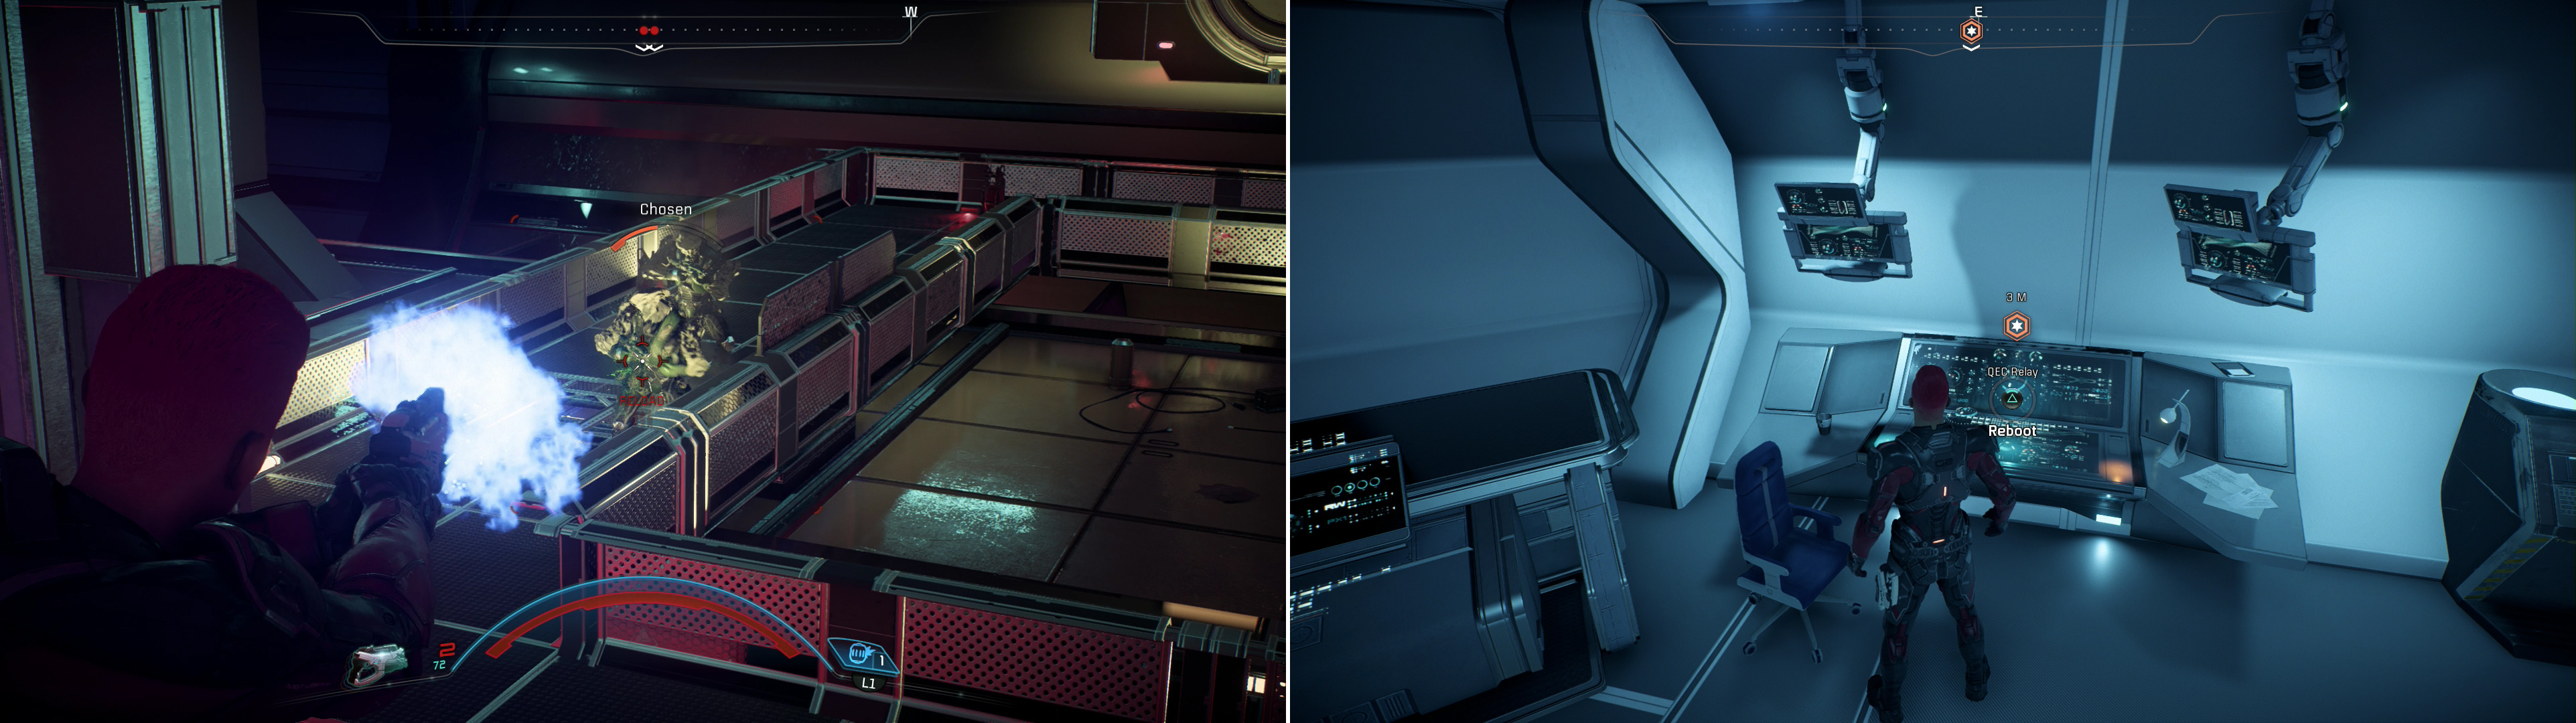 As your sibling, fight through the Kett on the Hyperion (left) then reactive the QEC Relay to save the Pathfinder (right).